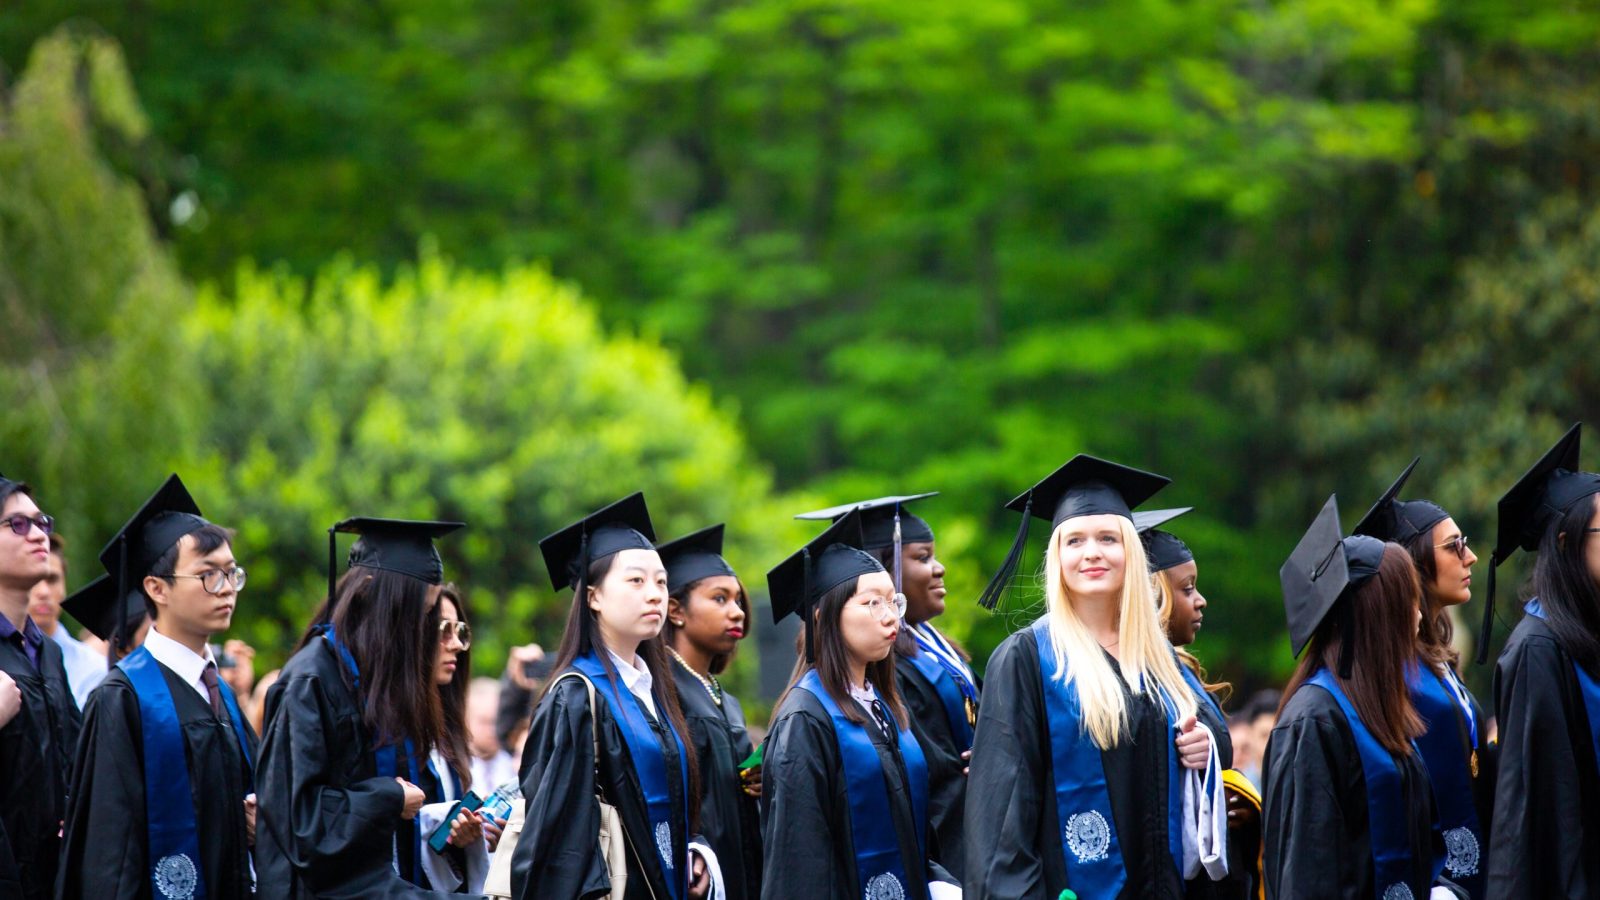 Graduate students wearing academic regalia line up on Healy Lawn for the Commencement Ceremony in 2019